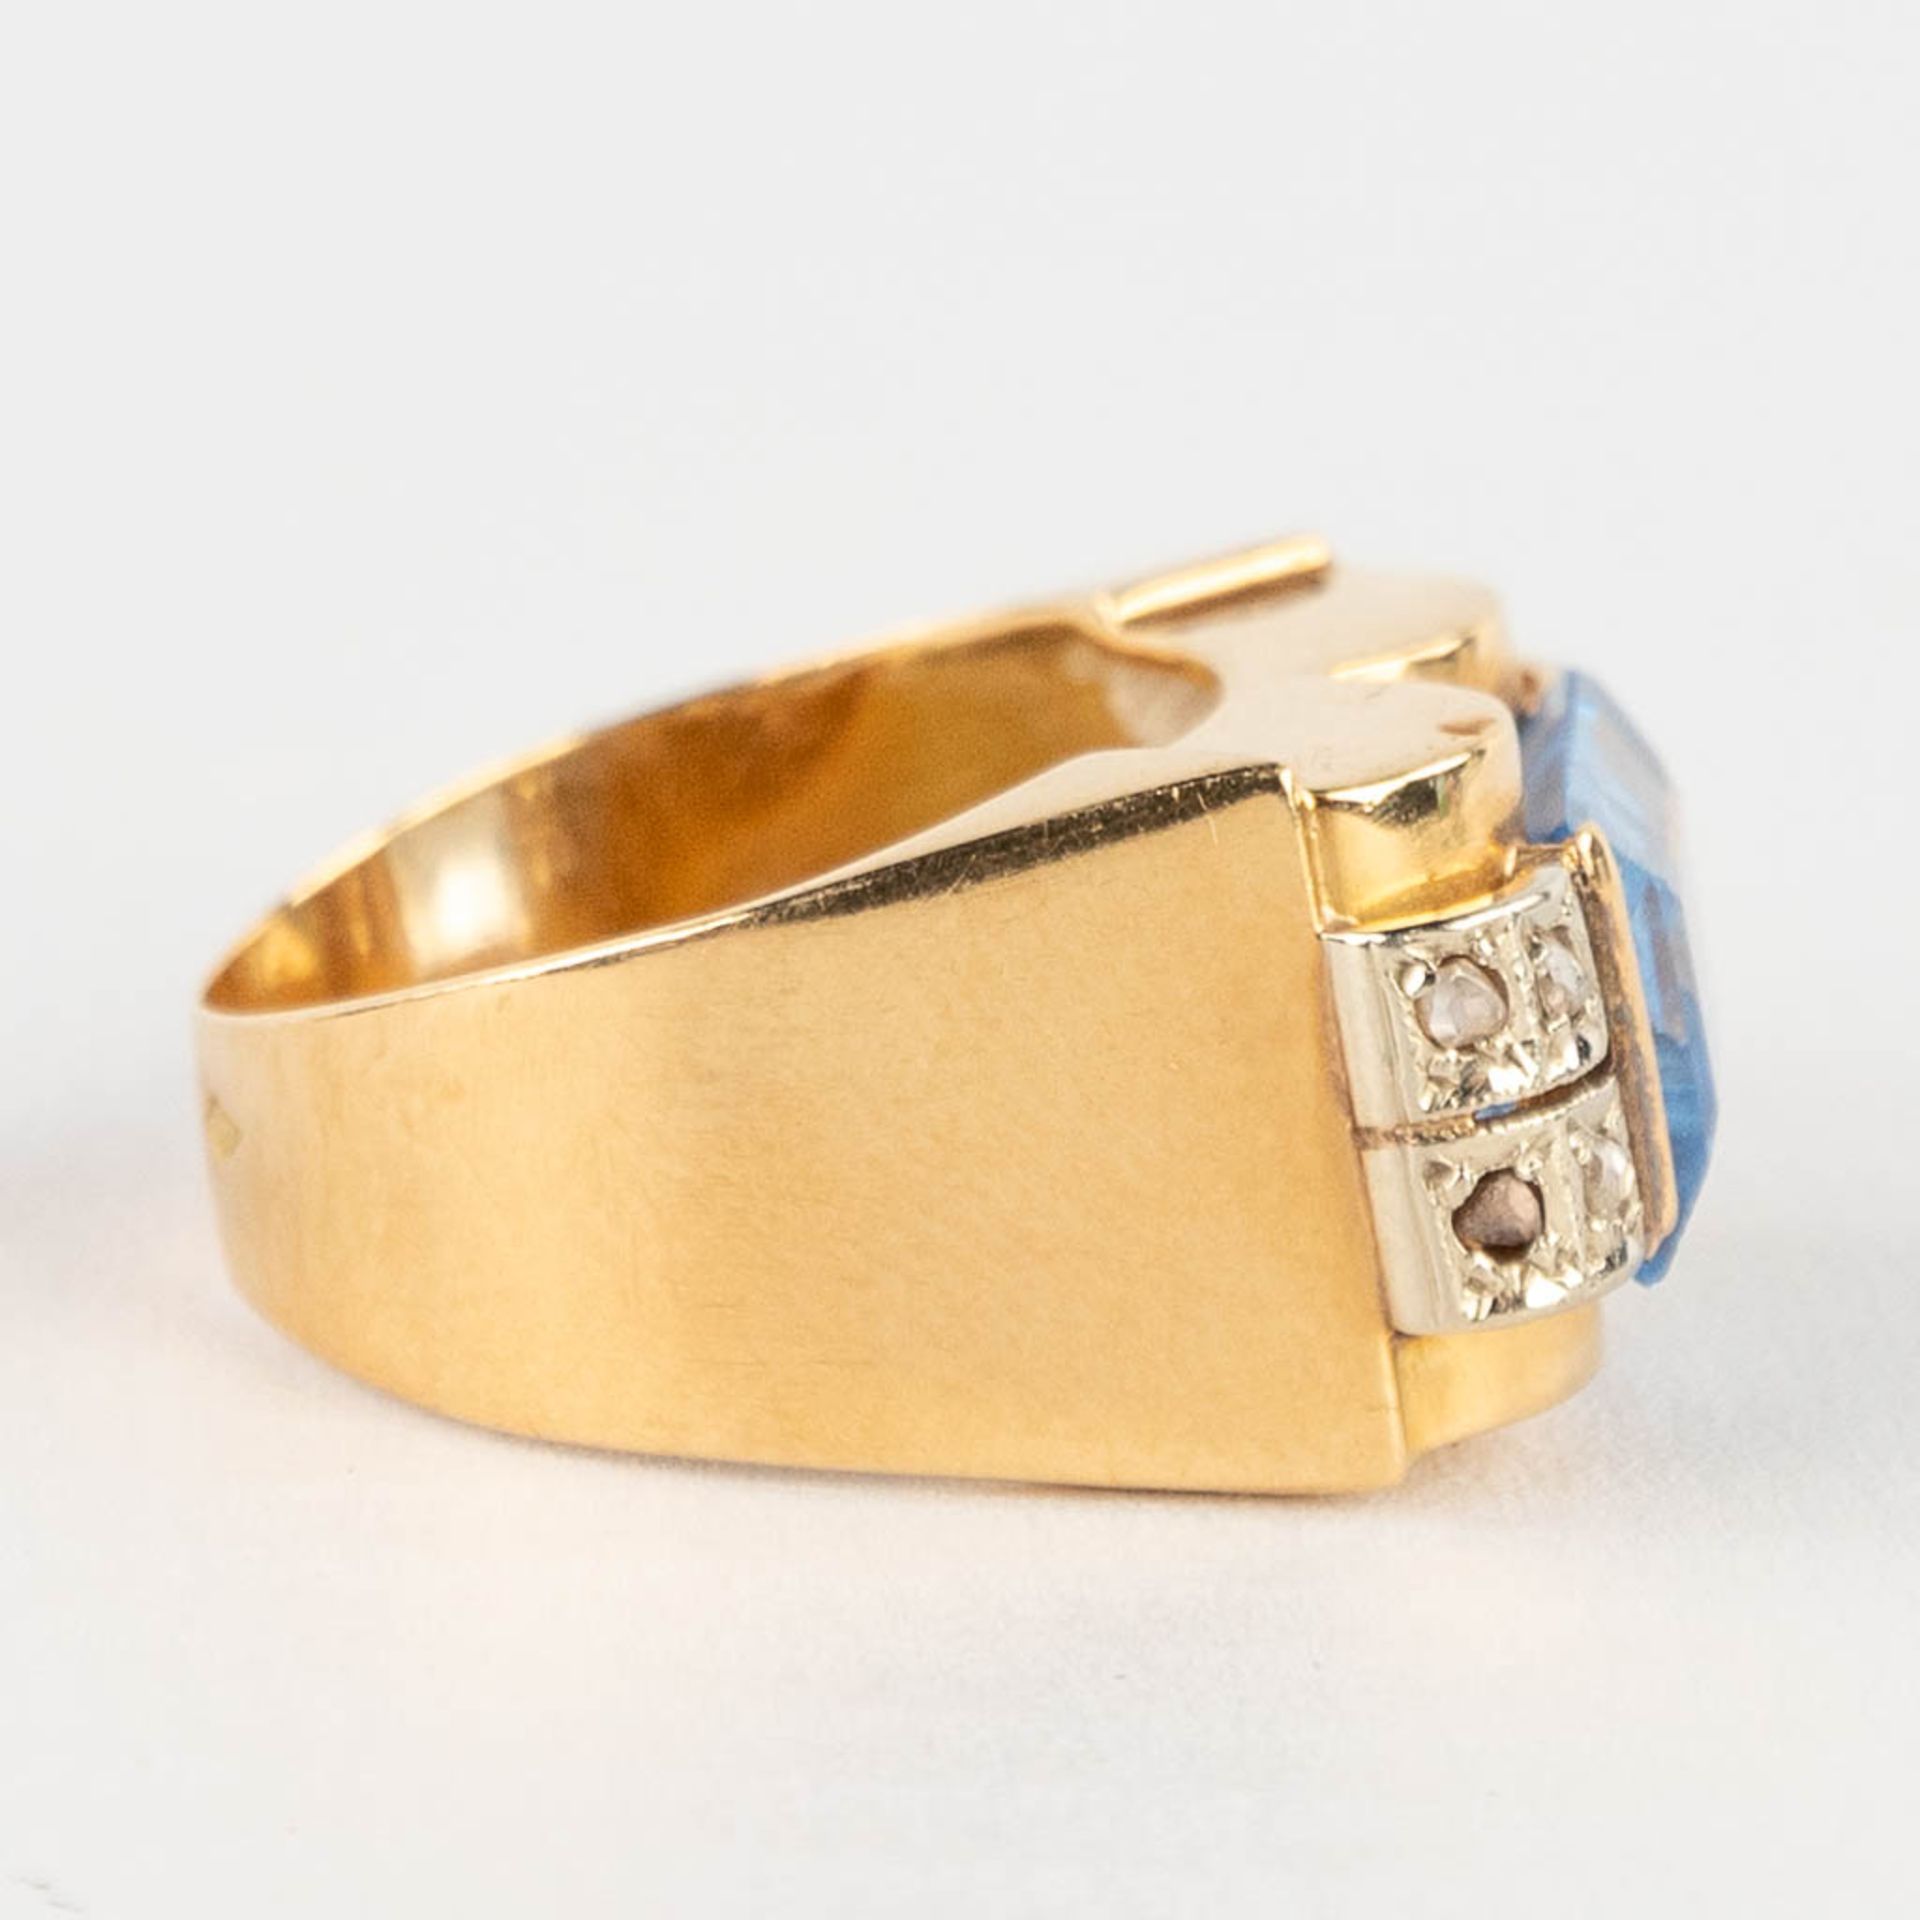 A ring, yellow gold with light blue cut stone/glass. 8,29g. Ring size: 58. 18 karat gold. - Image 7 of 10